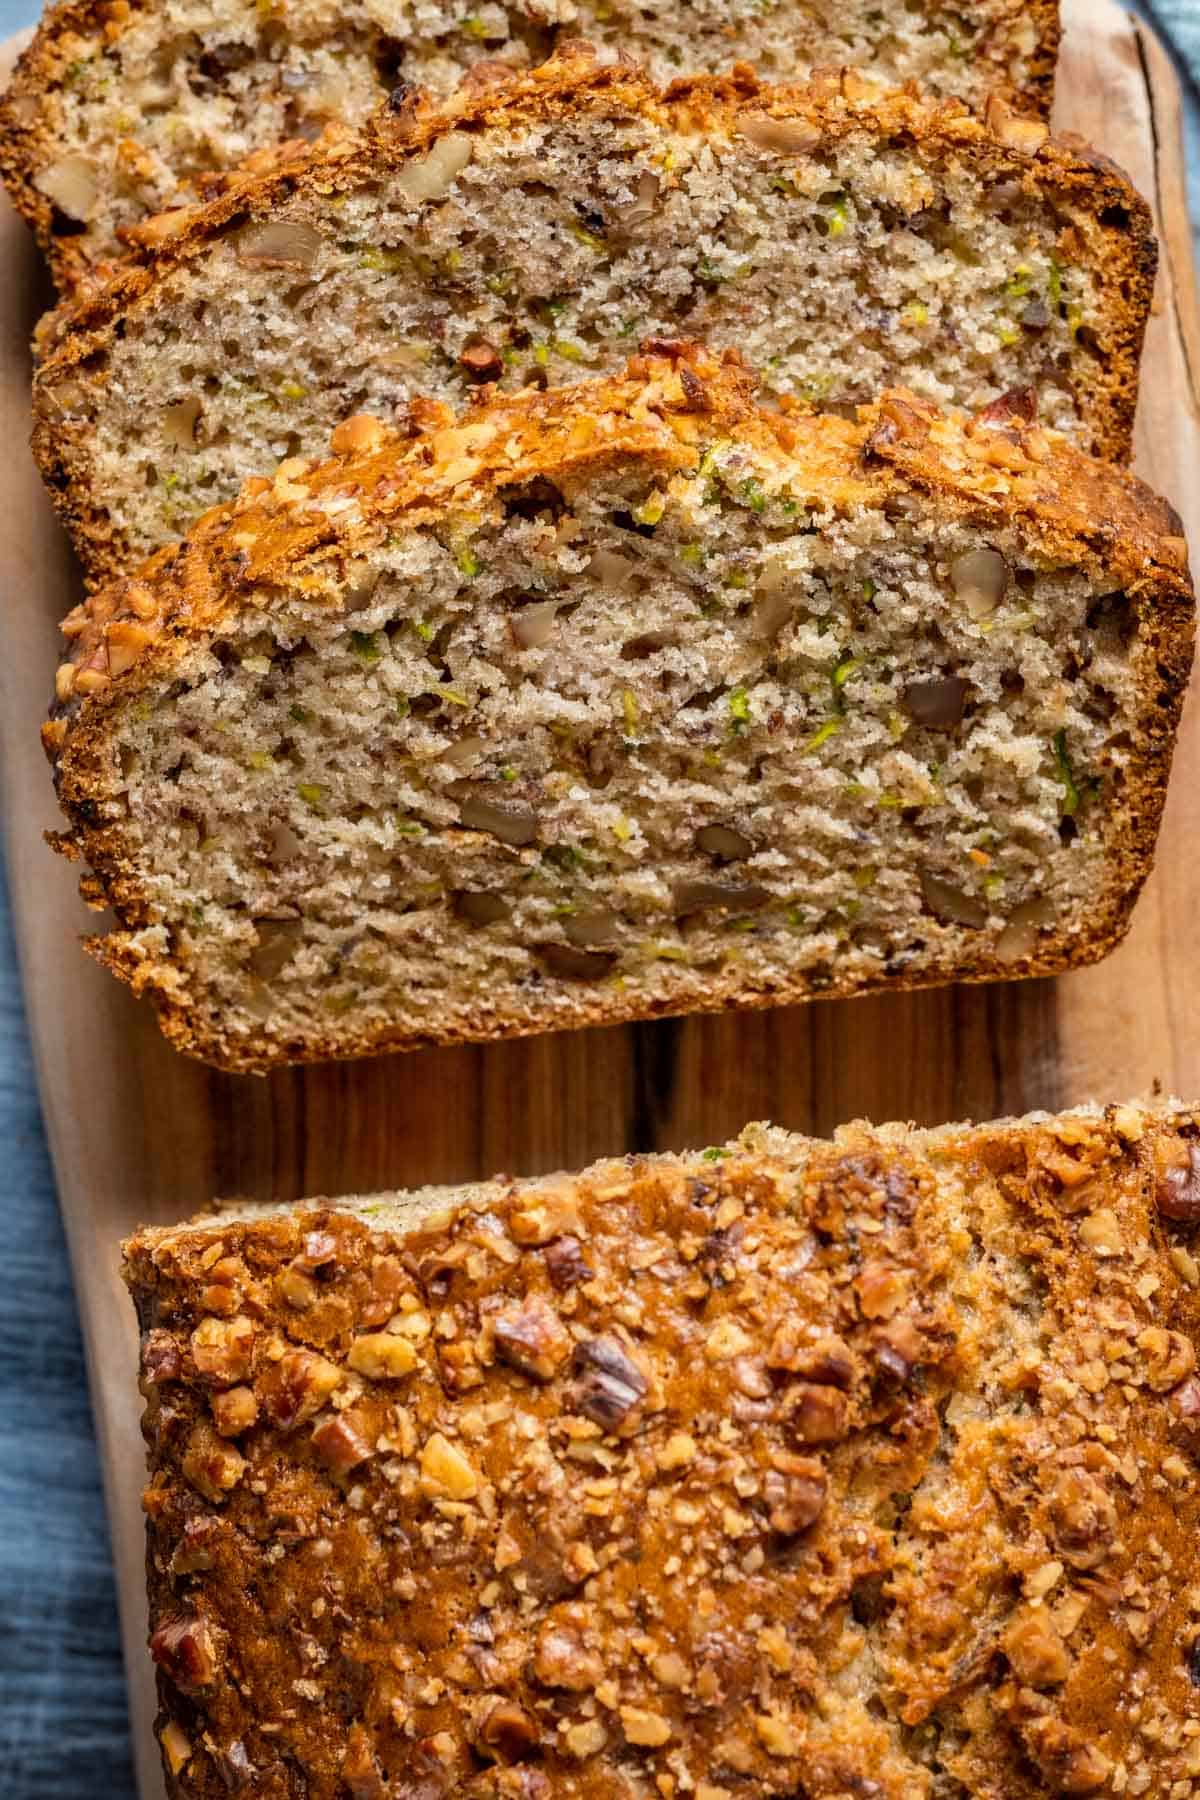 Sliced loaf of vegan zucchini bread on a wooden board.